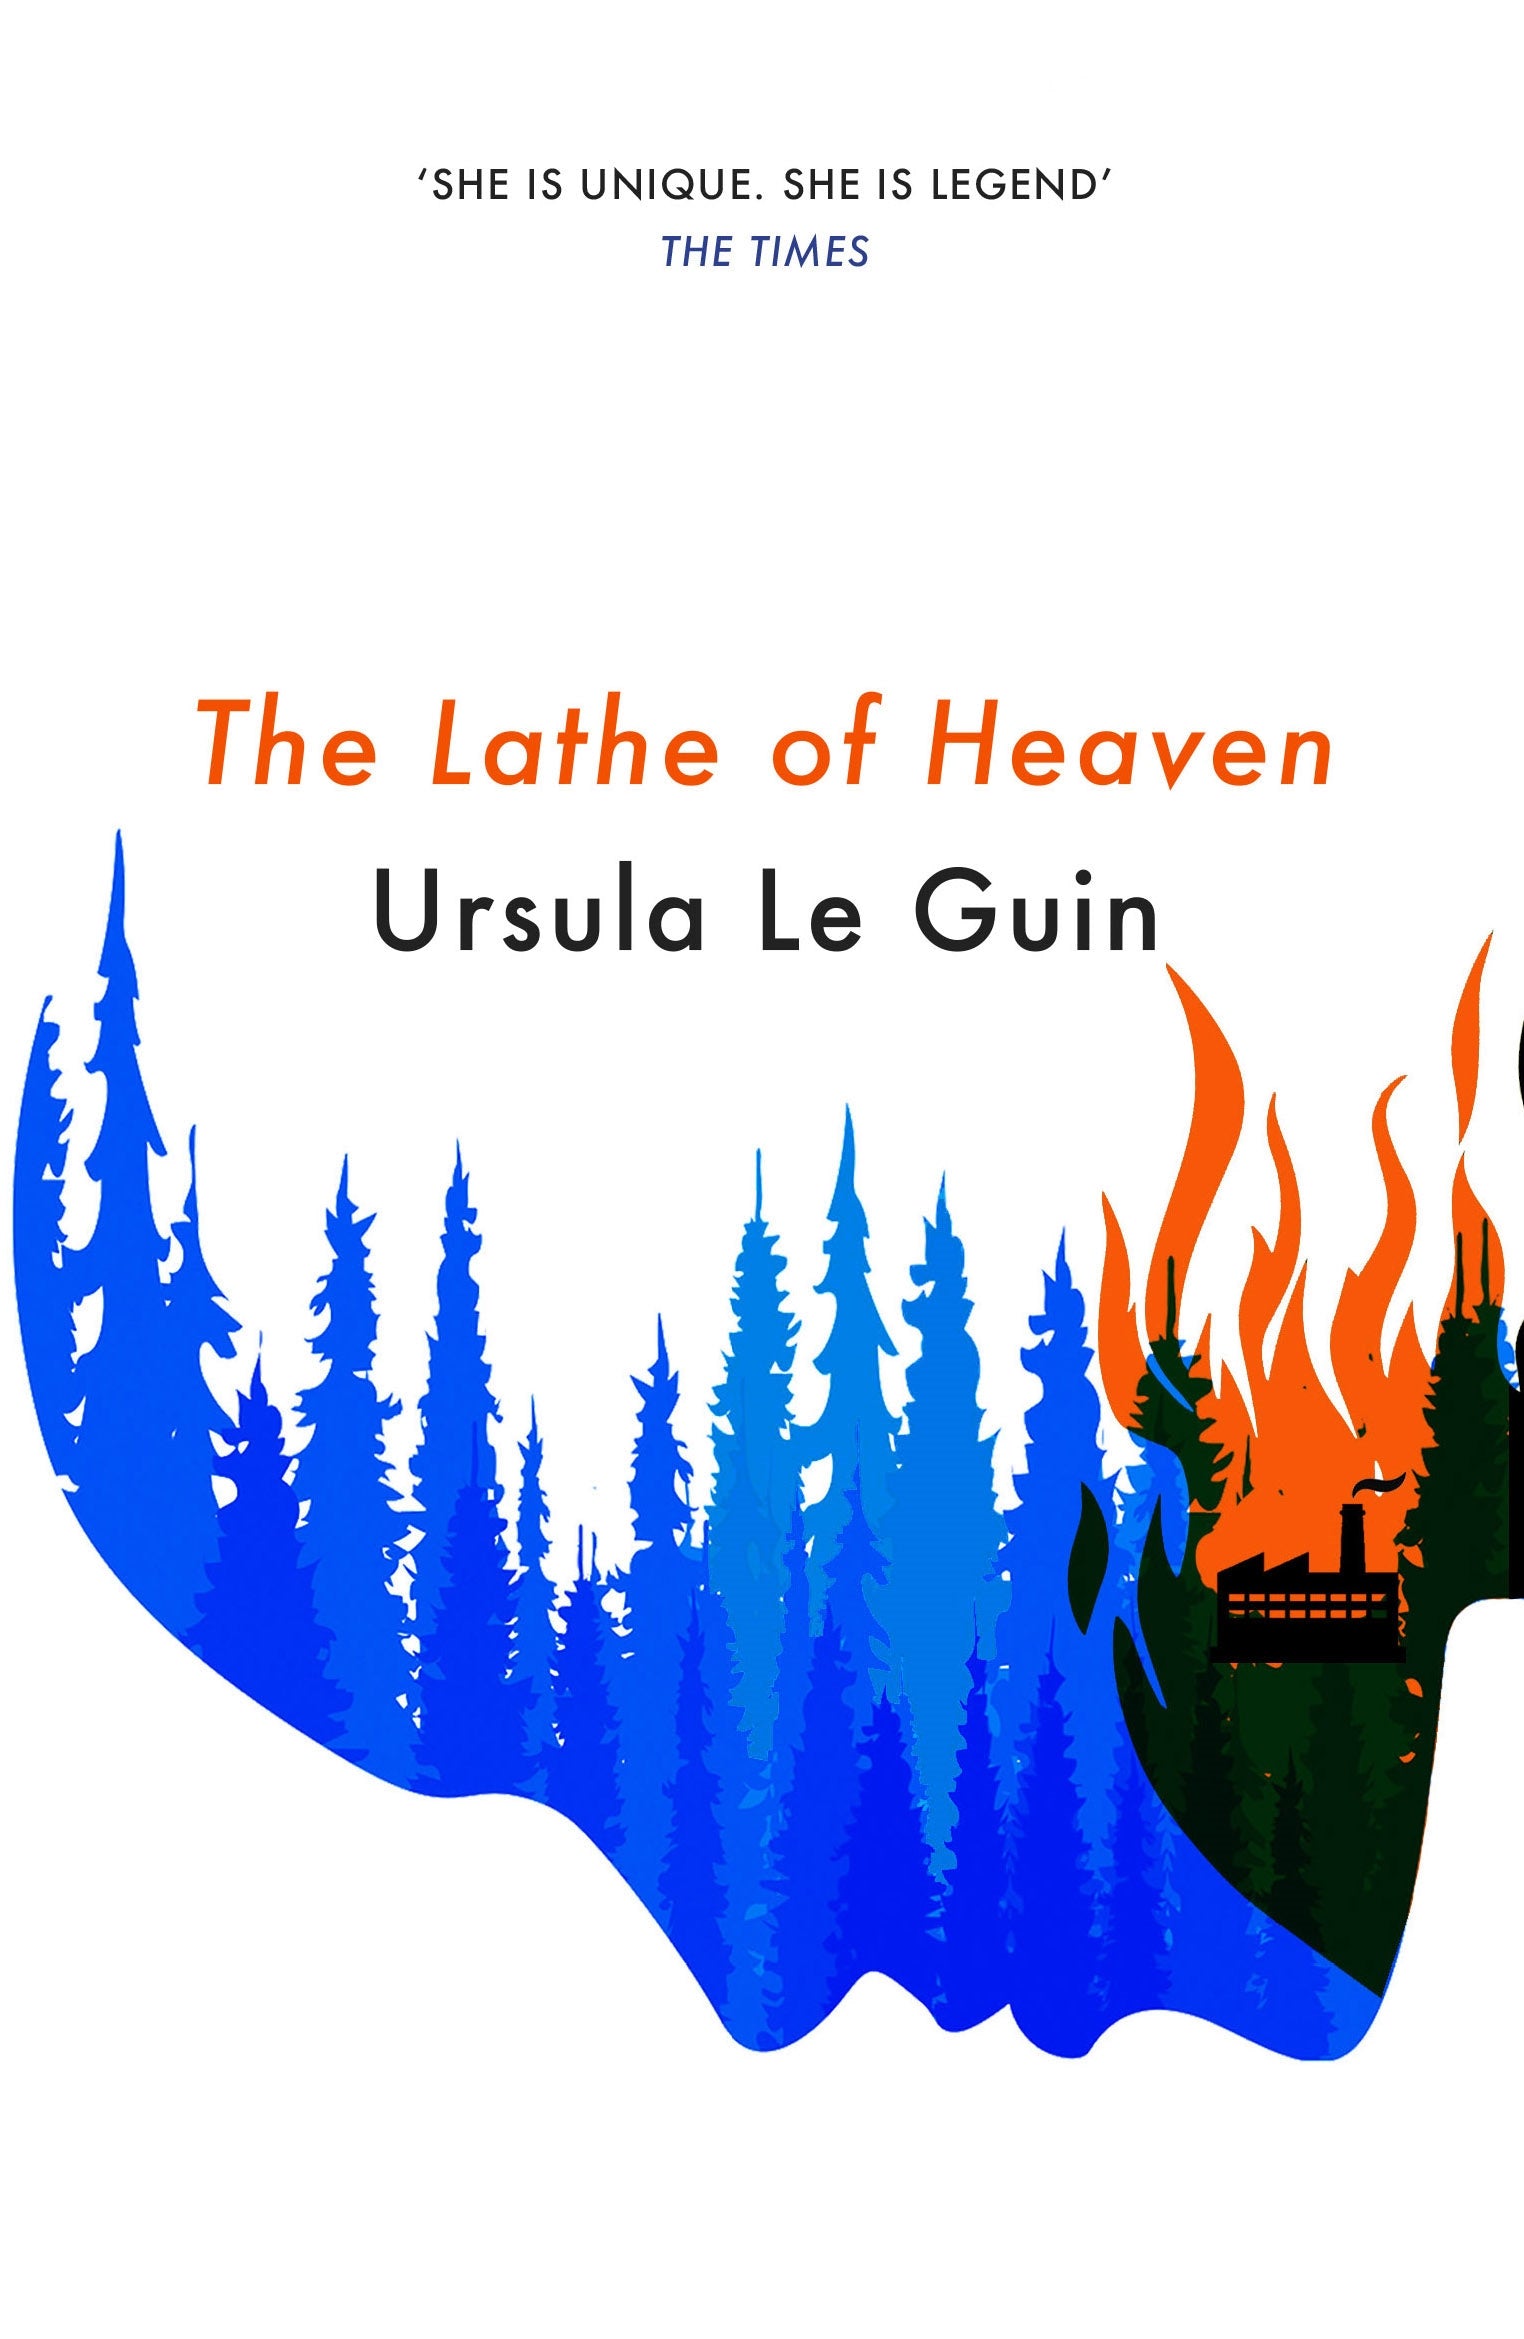 The Lathe Of Heaven by Ursula K. Le Guin